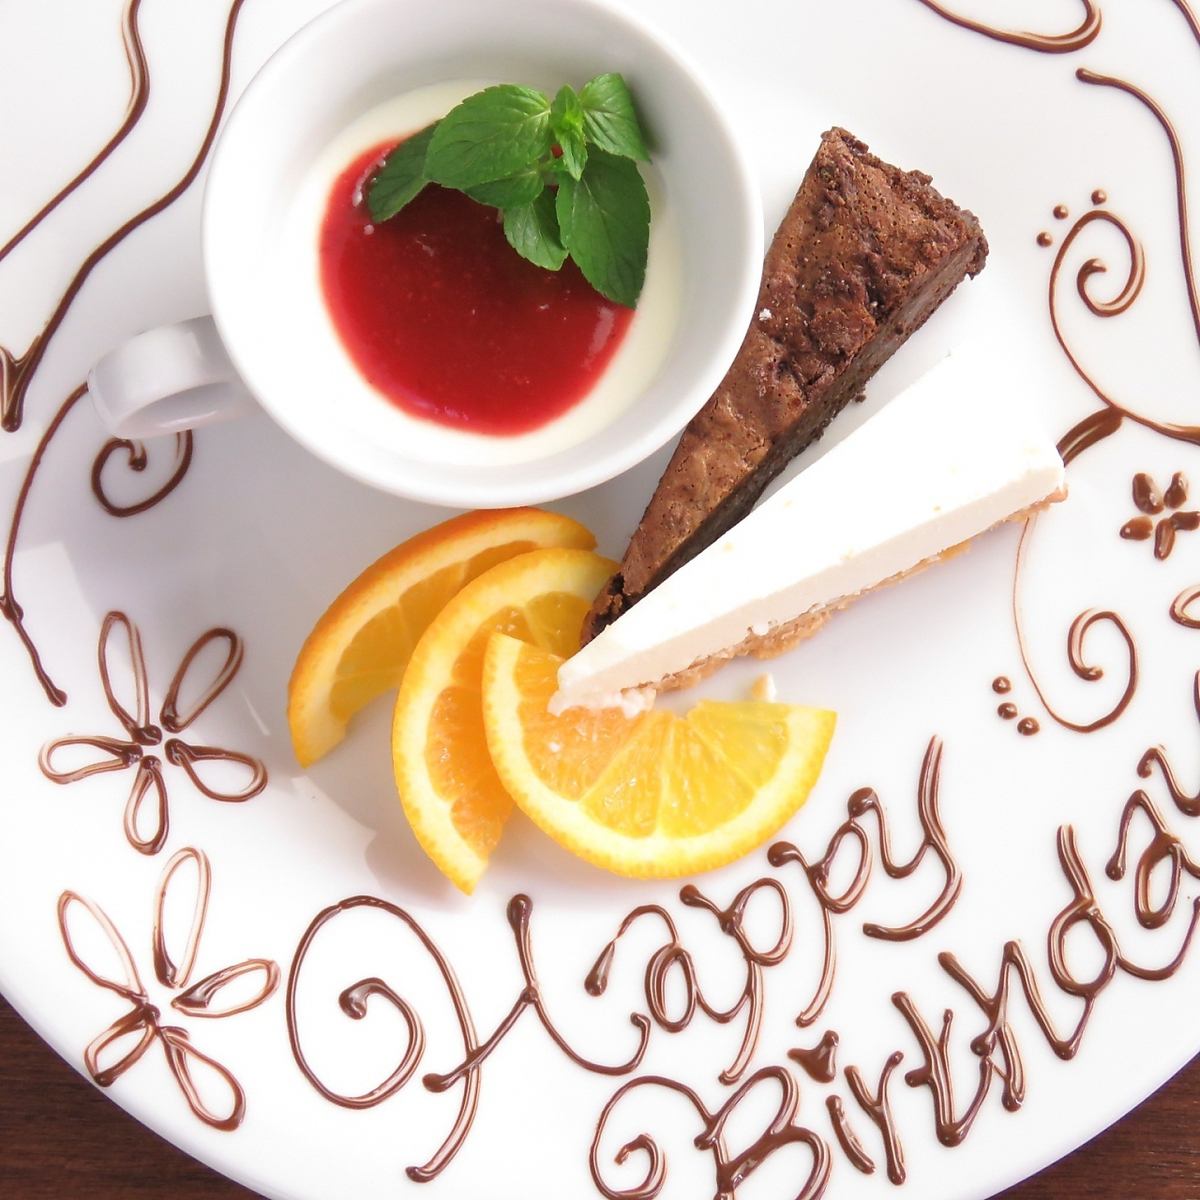 For a birthday surprise! A dessert plate with a message is available♪